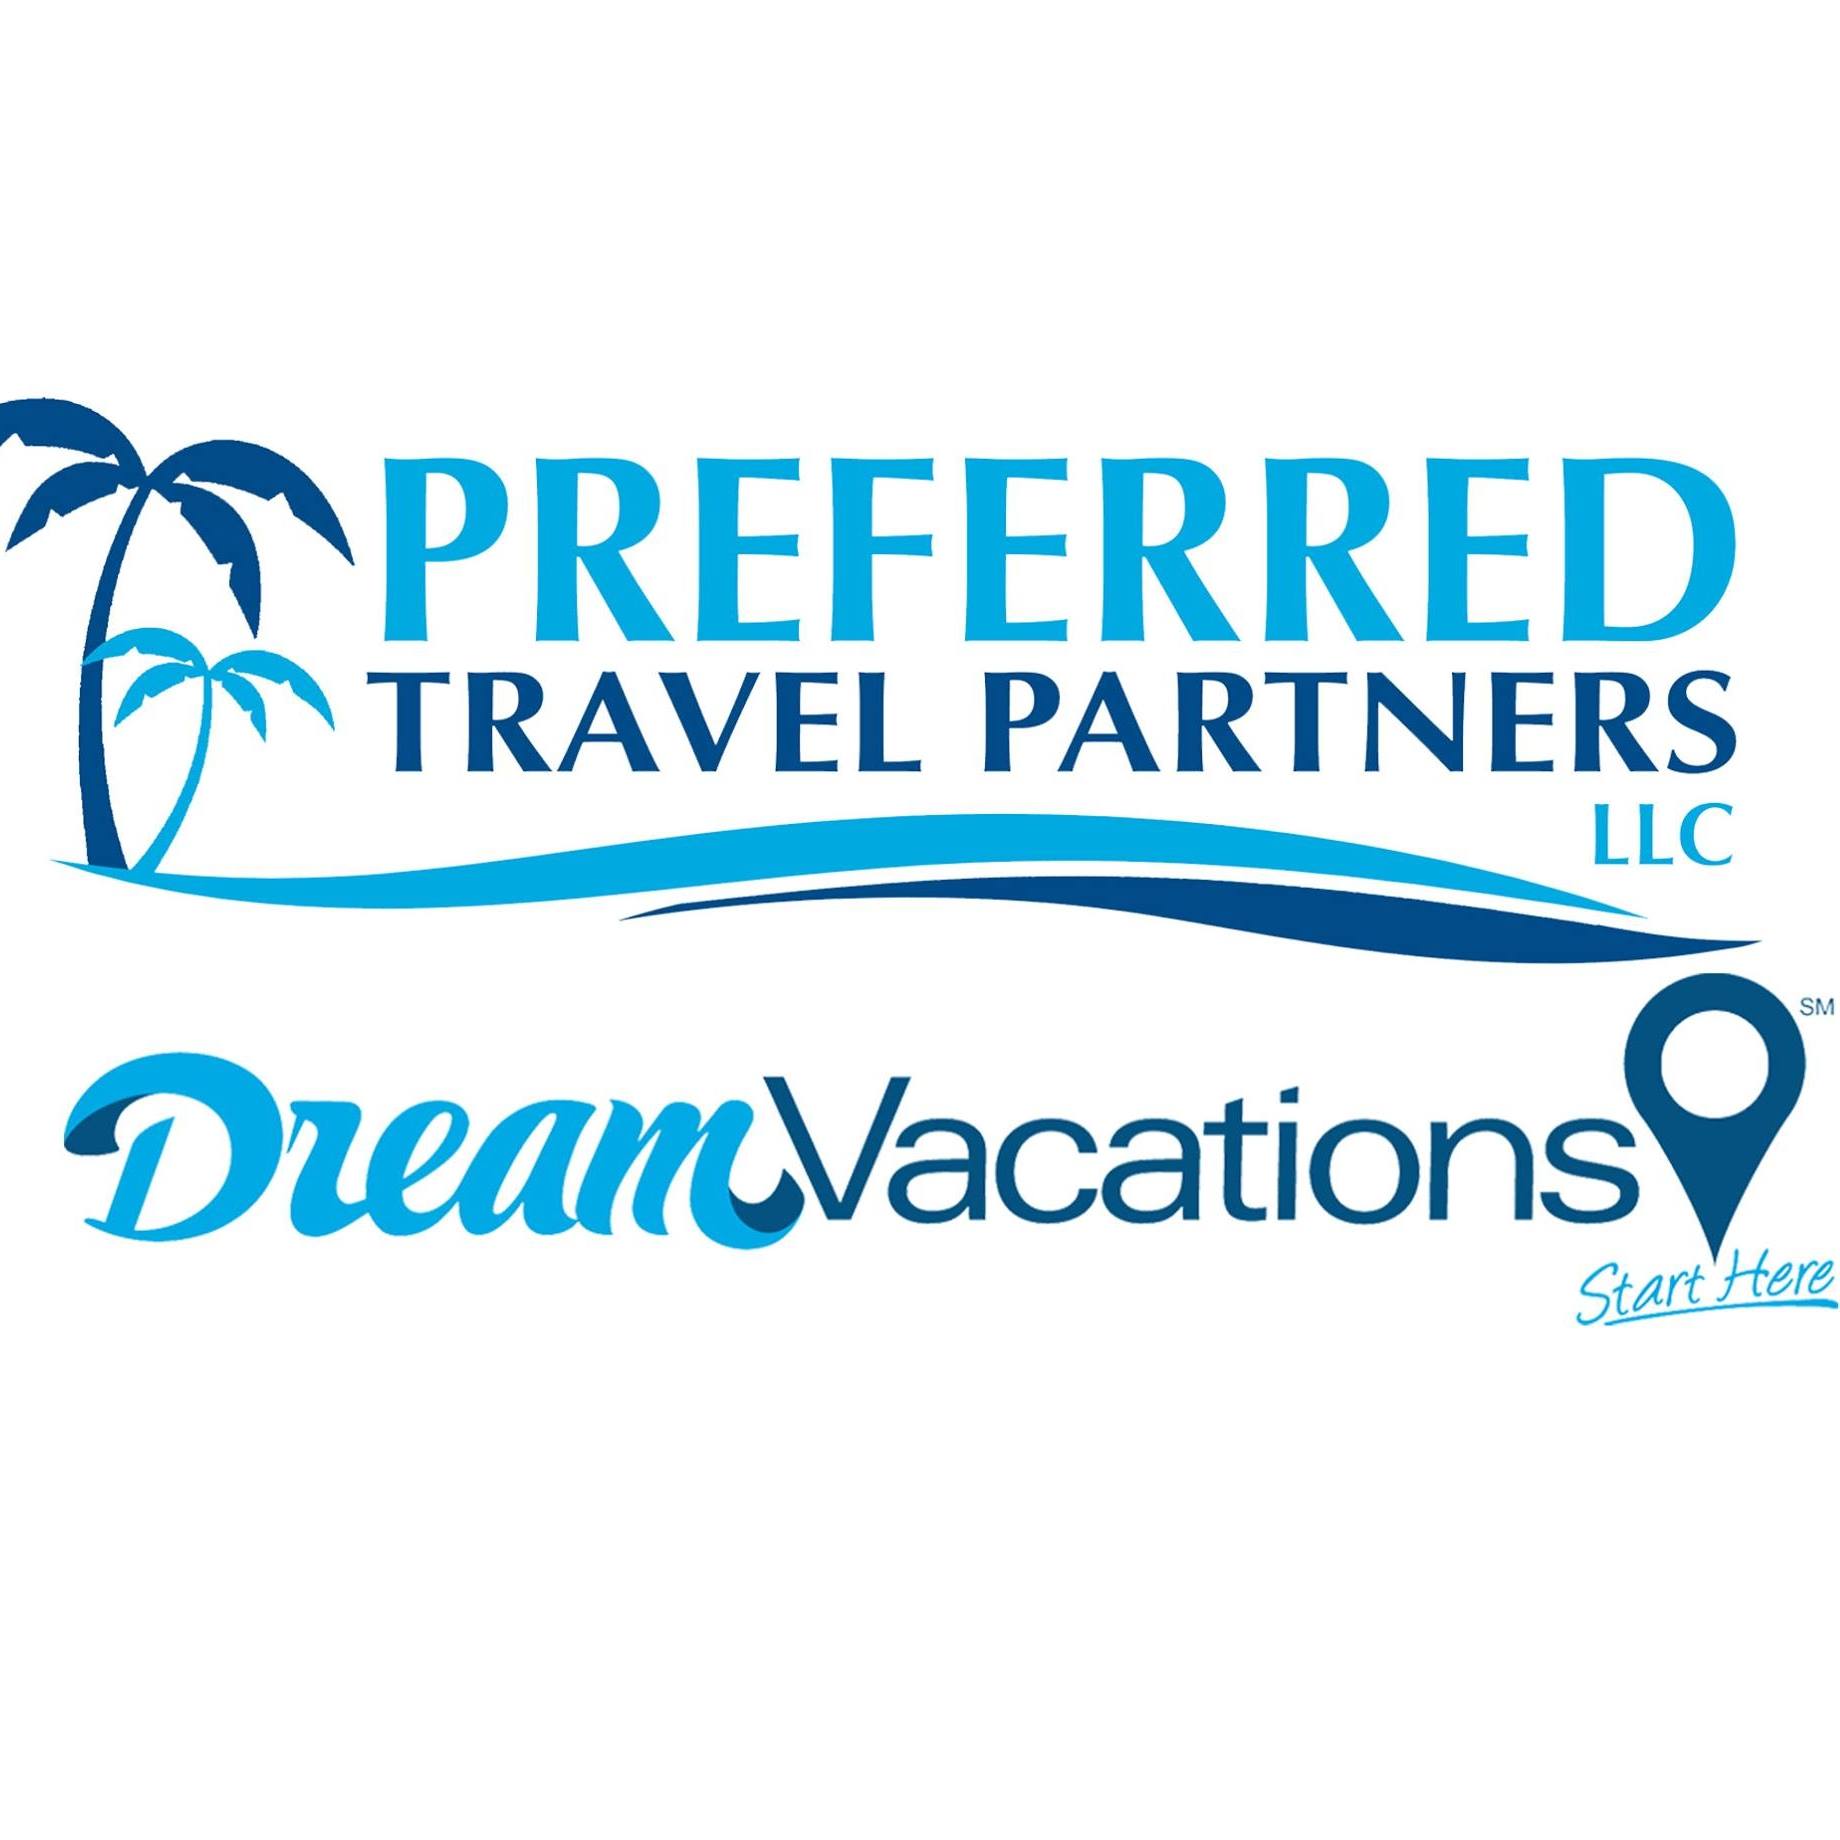 Preferred Travel Partners - Dream Vacations